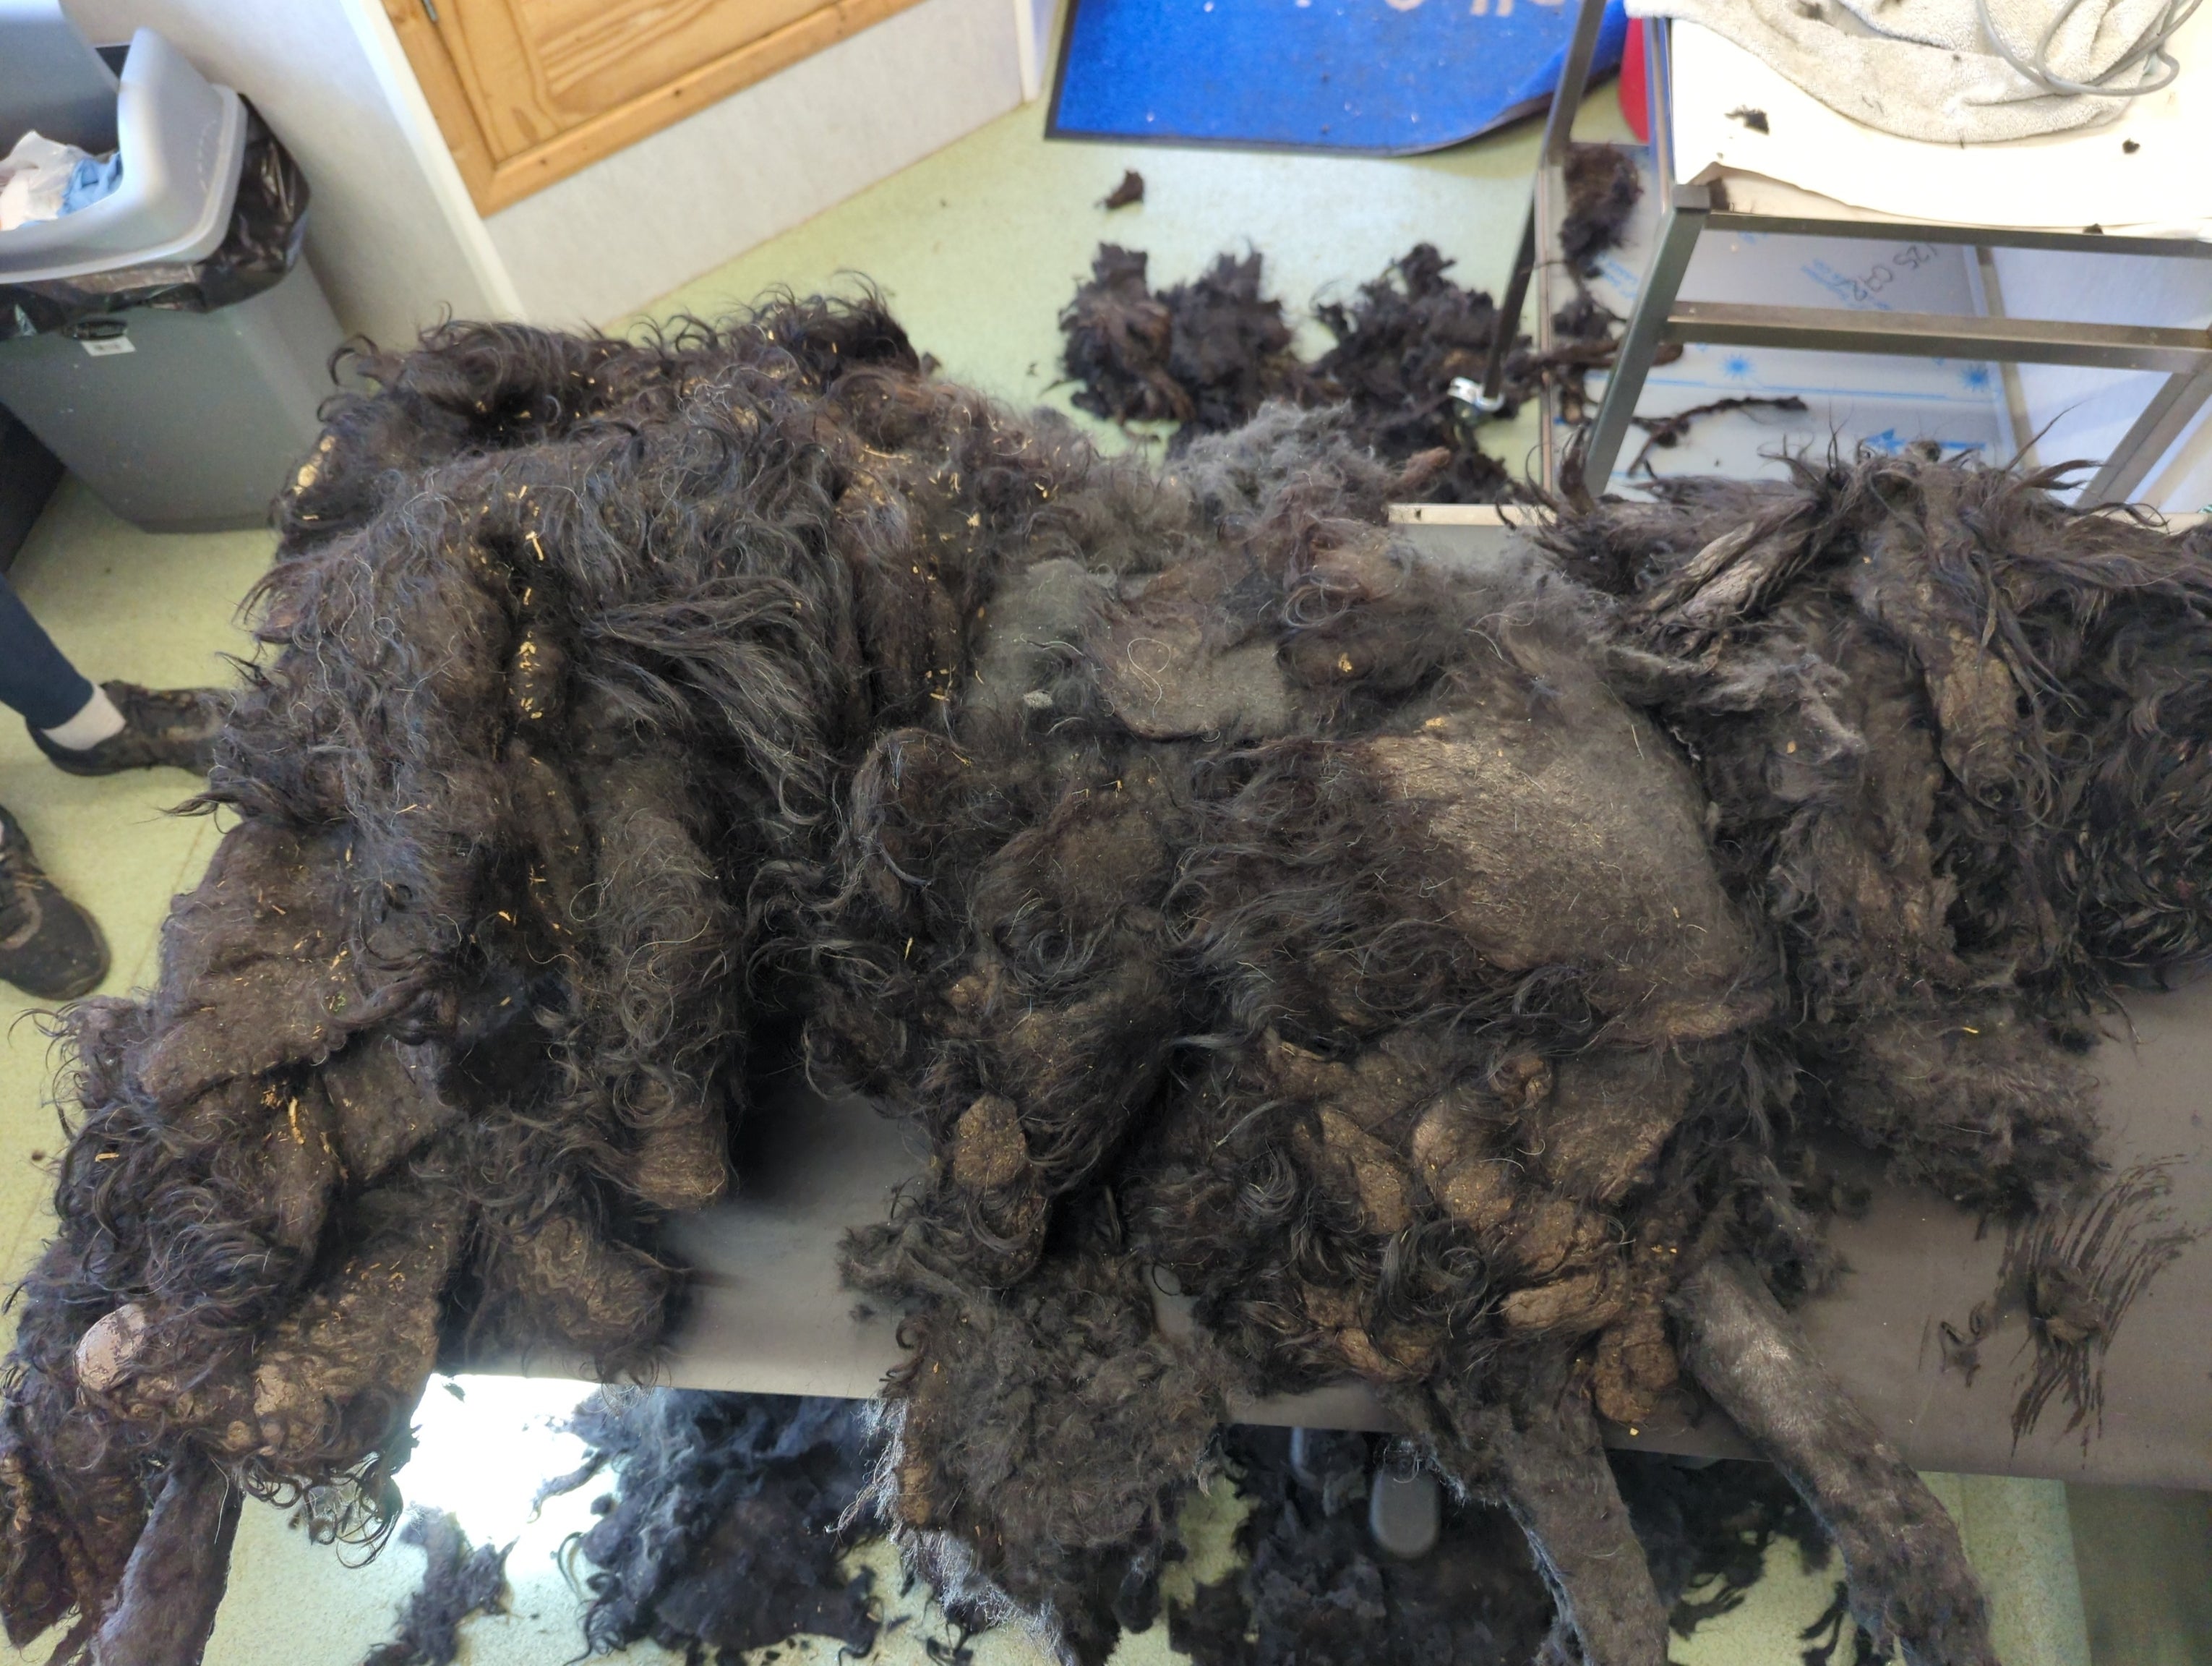 The Russian Terrier was covered in 17lbs of extra weight due to matted fur